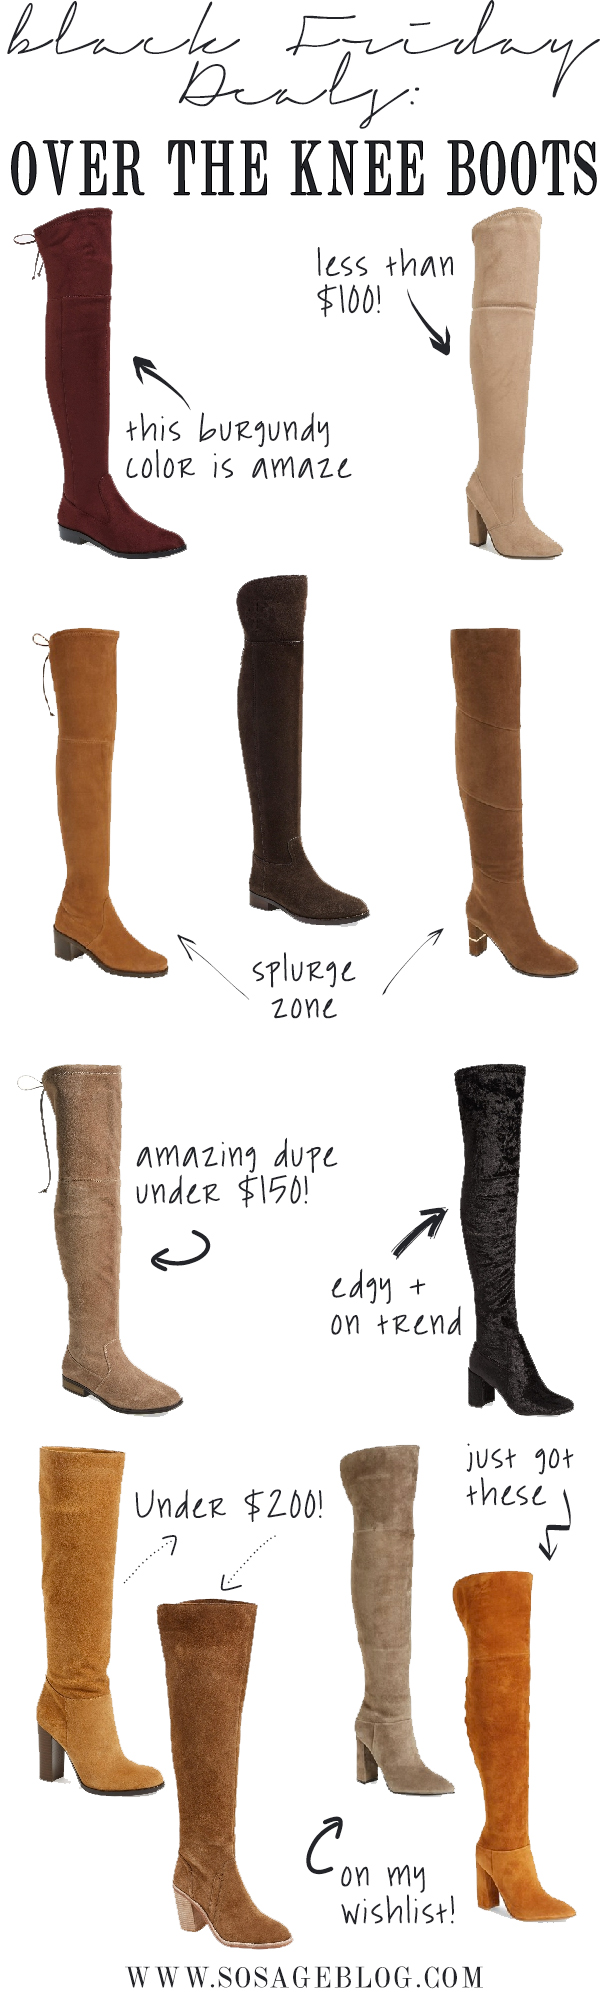 over the knee boots black friday